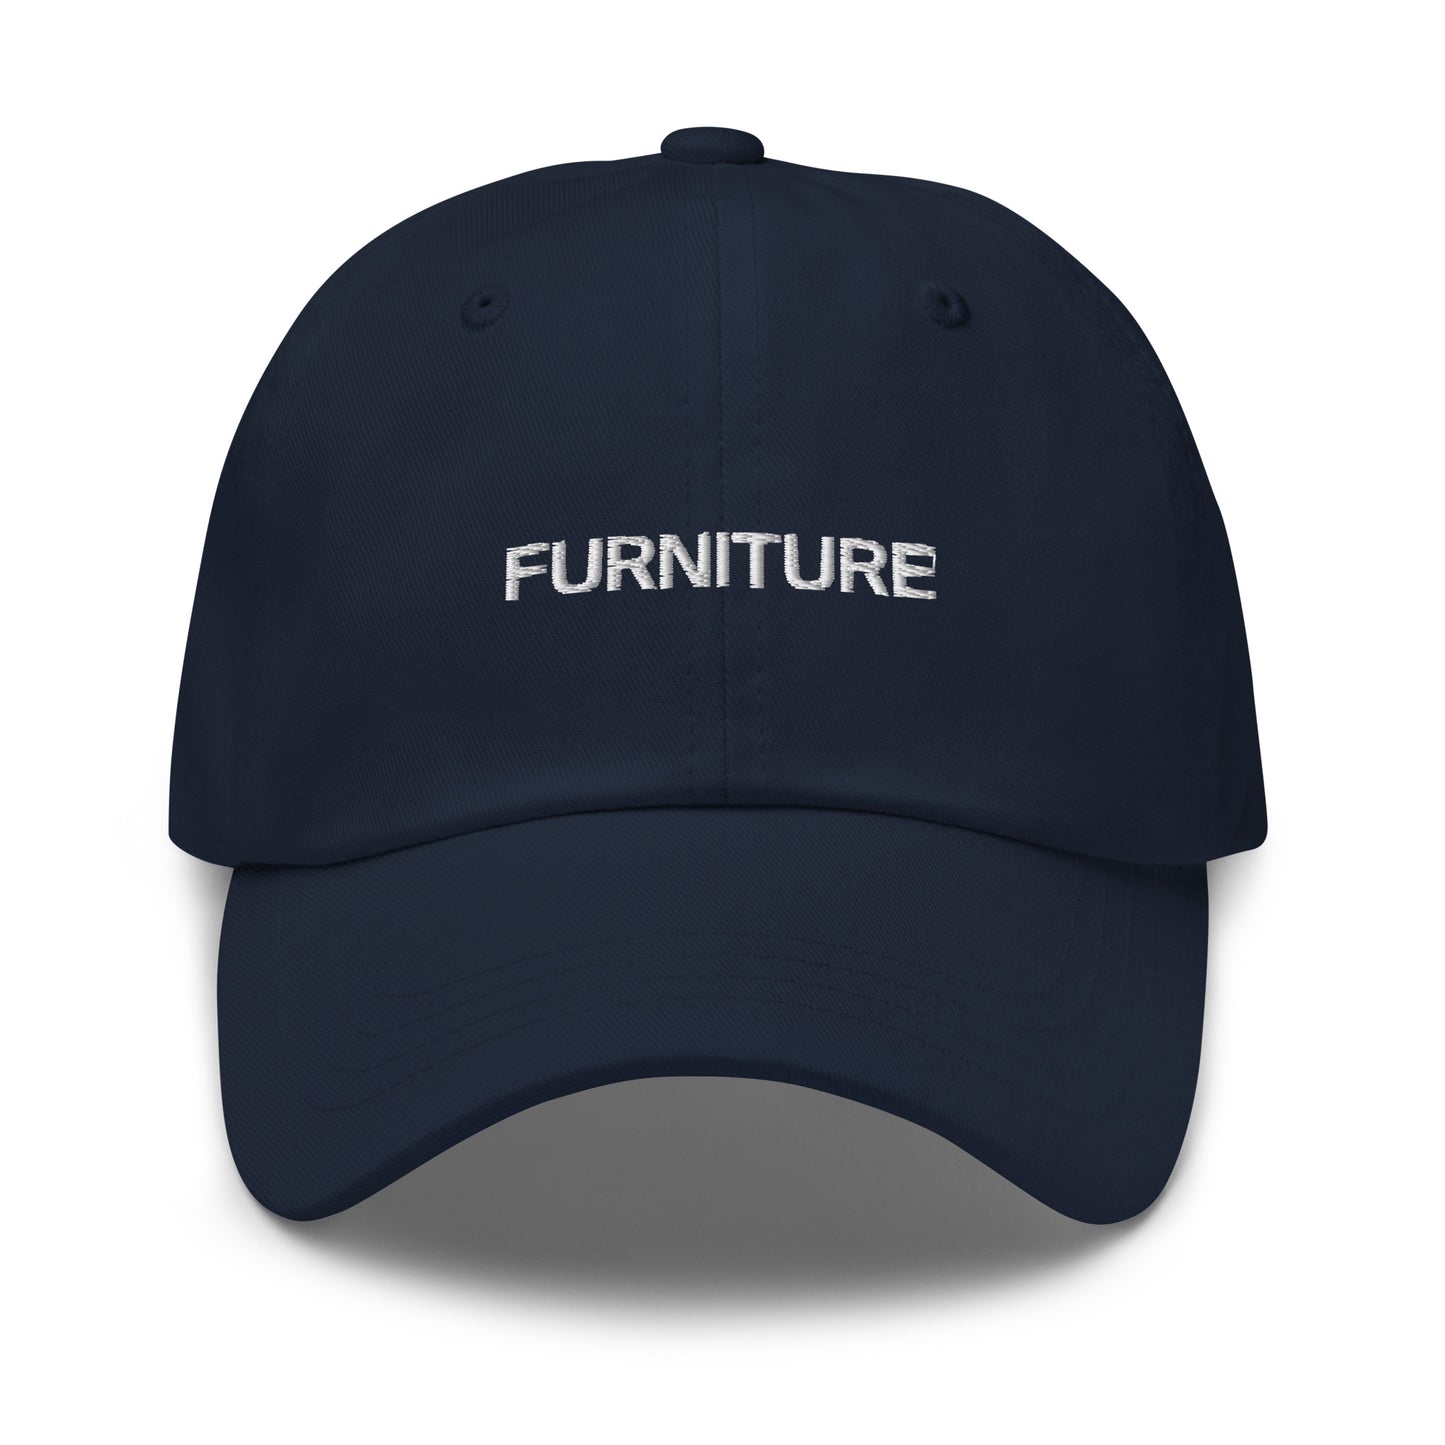 “FURNITURE” HAT - BLUE WITH WHITE